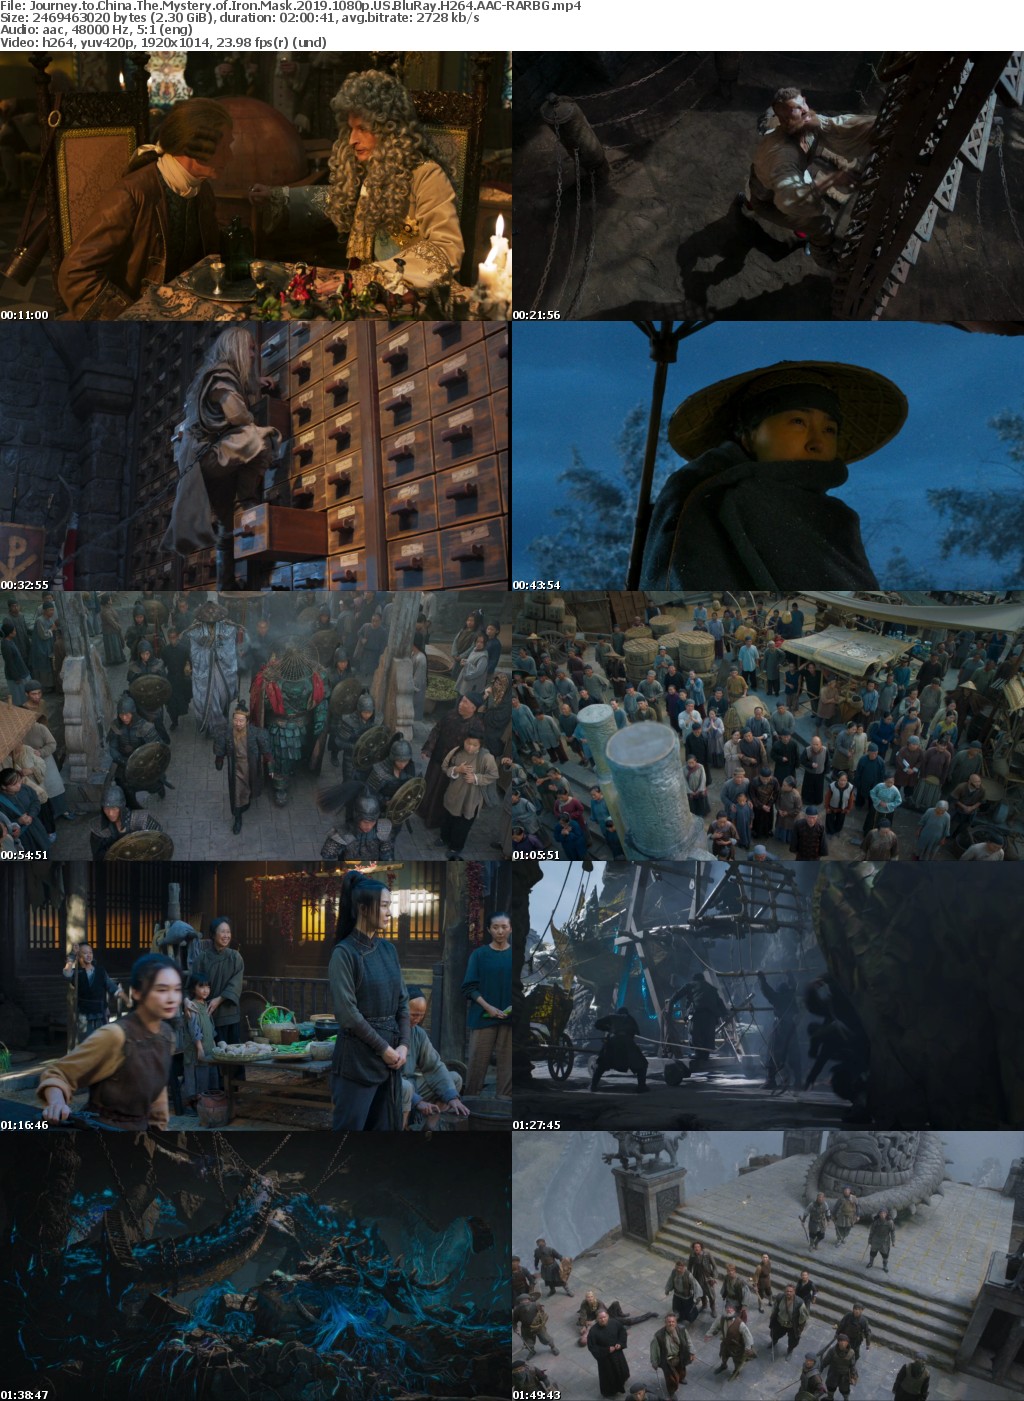 Journey to China The Mystery of Iron Mask 2019 1080p US BluRay H264 AAC-RARBG